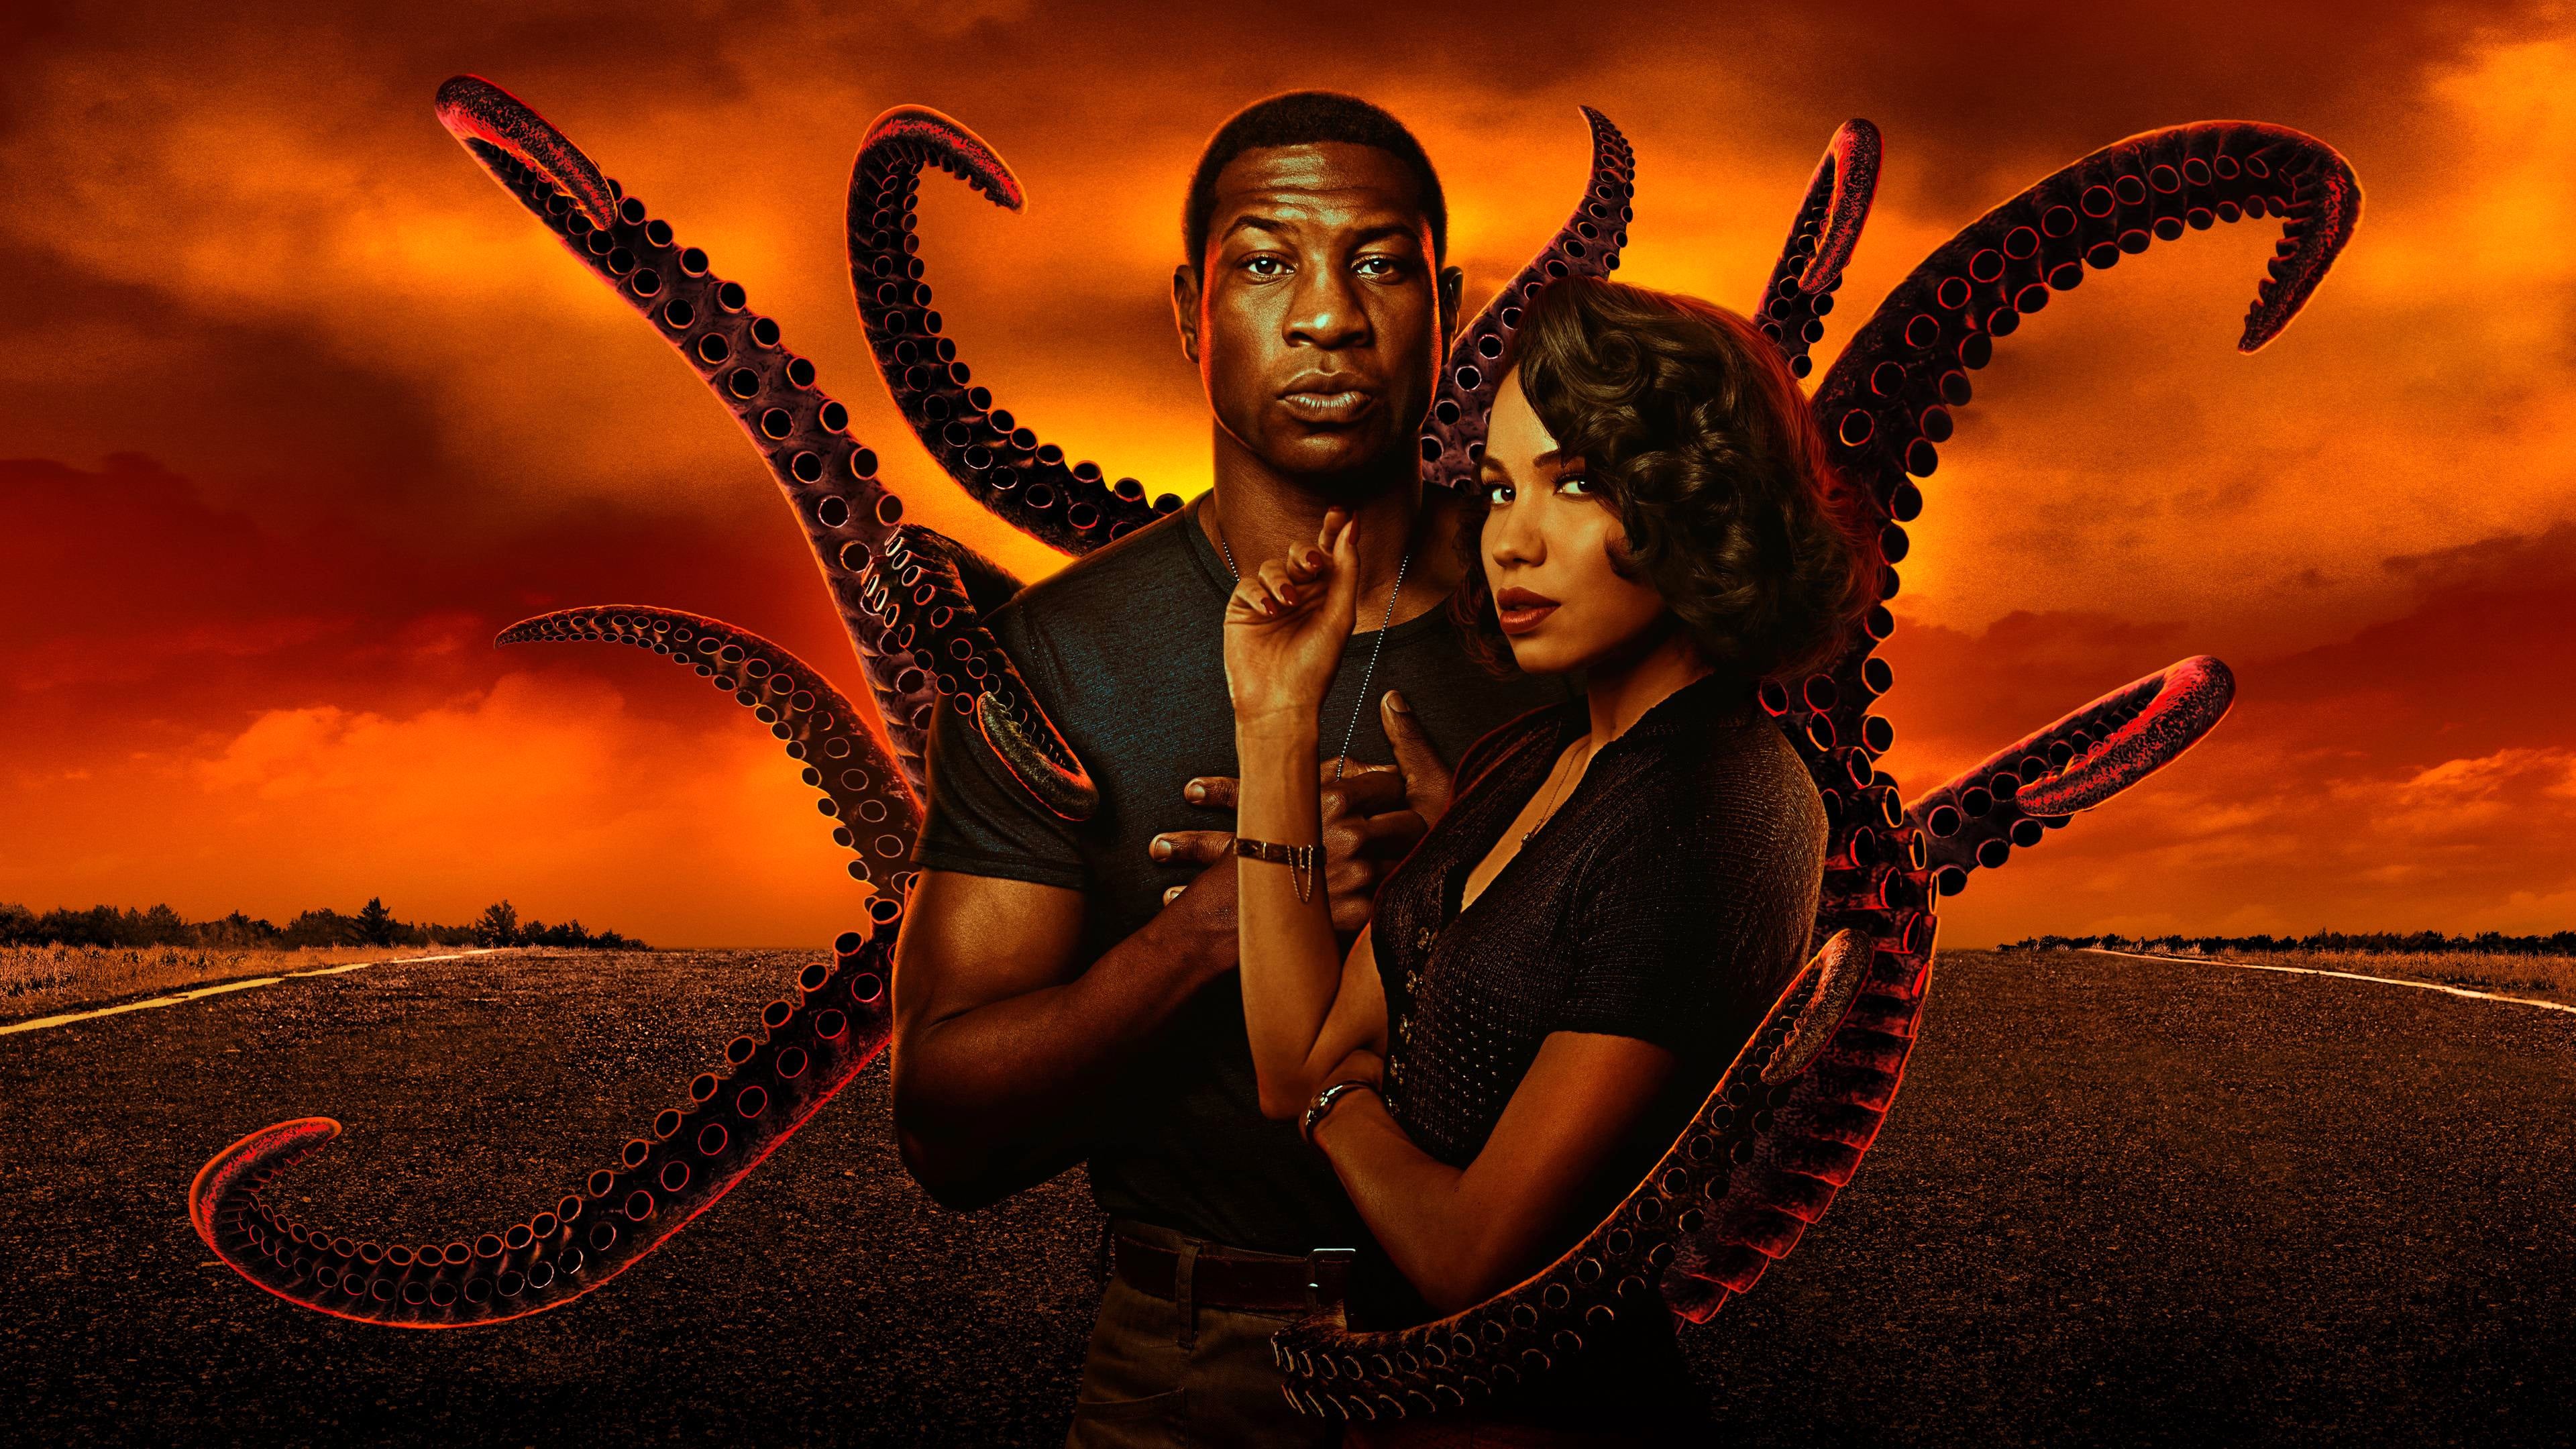 TV Show Lovecraft Country 4k Ultra HD Wallpaper